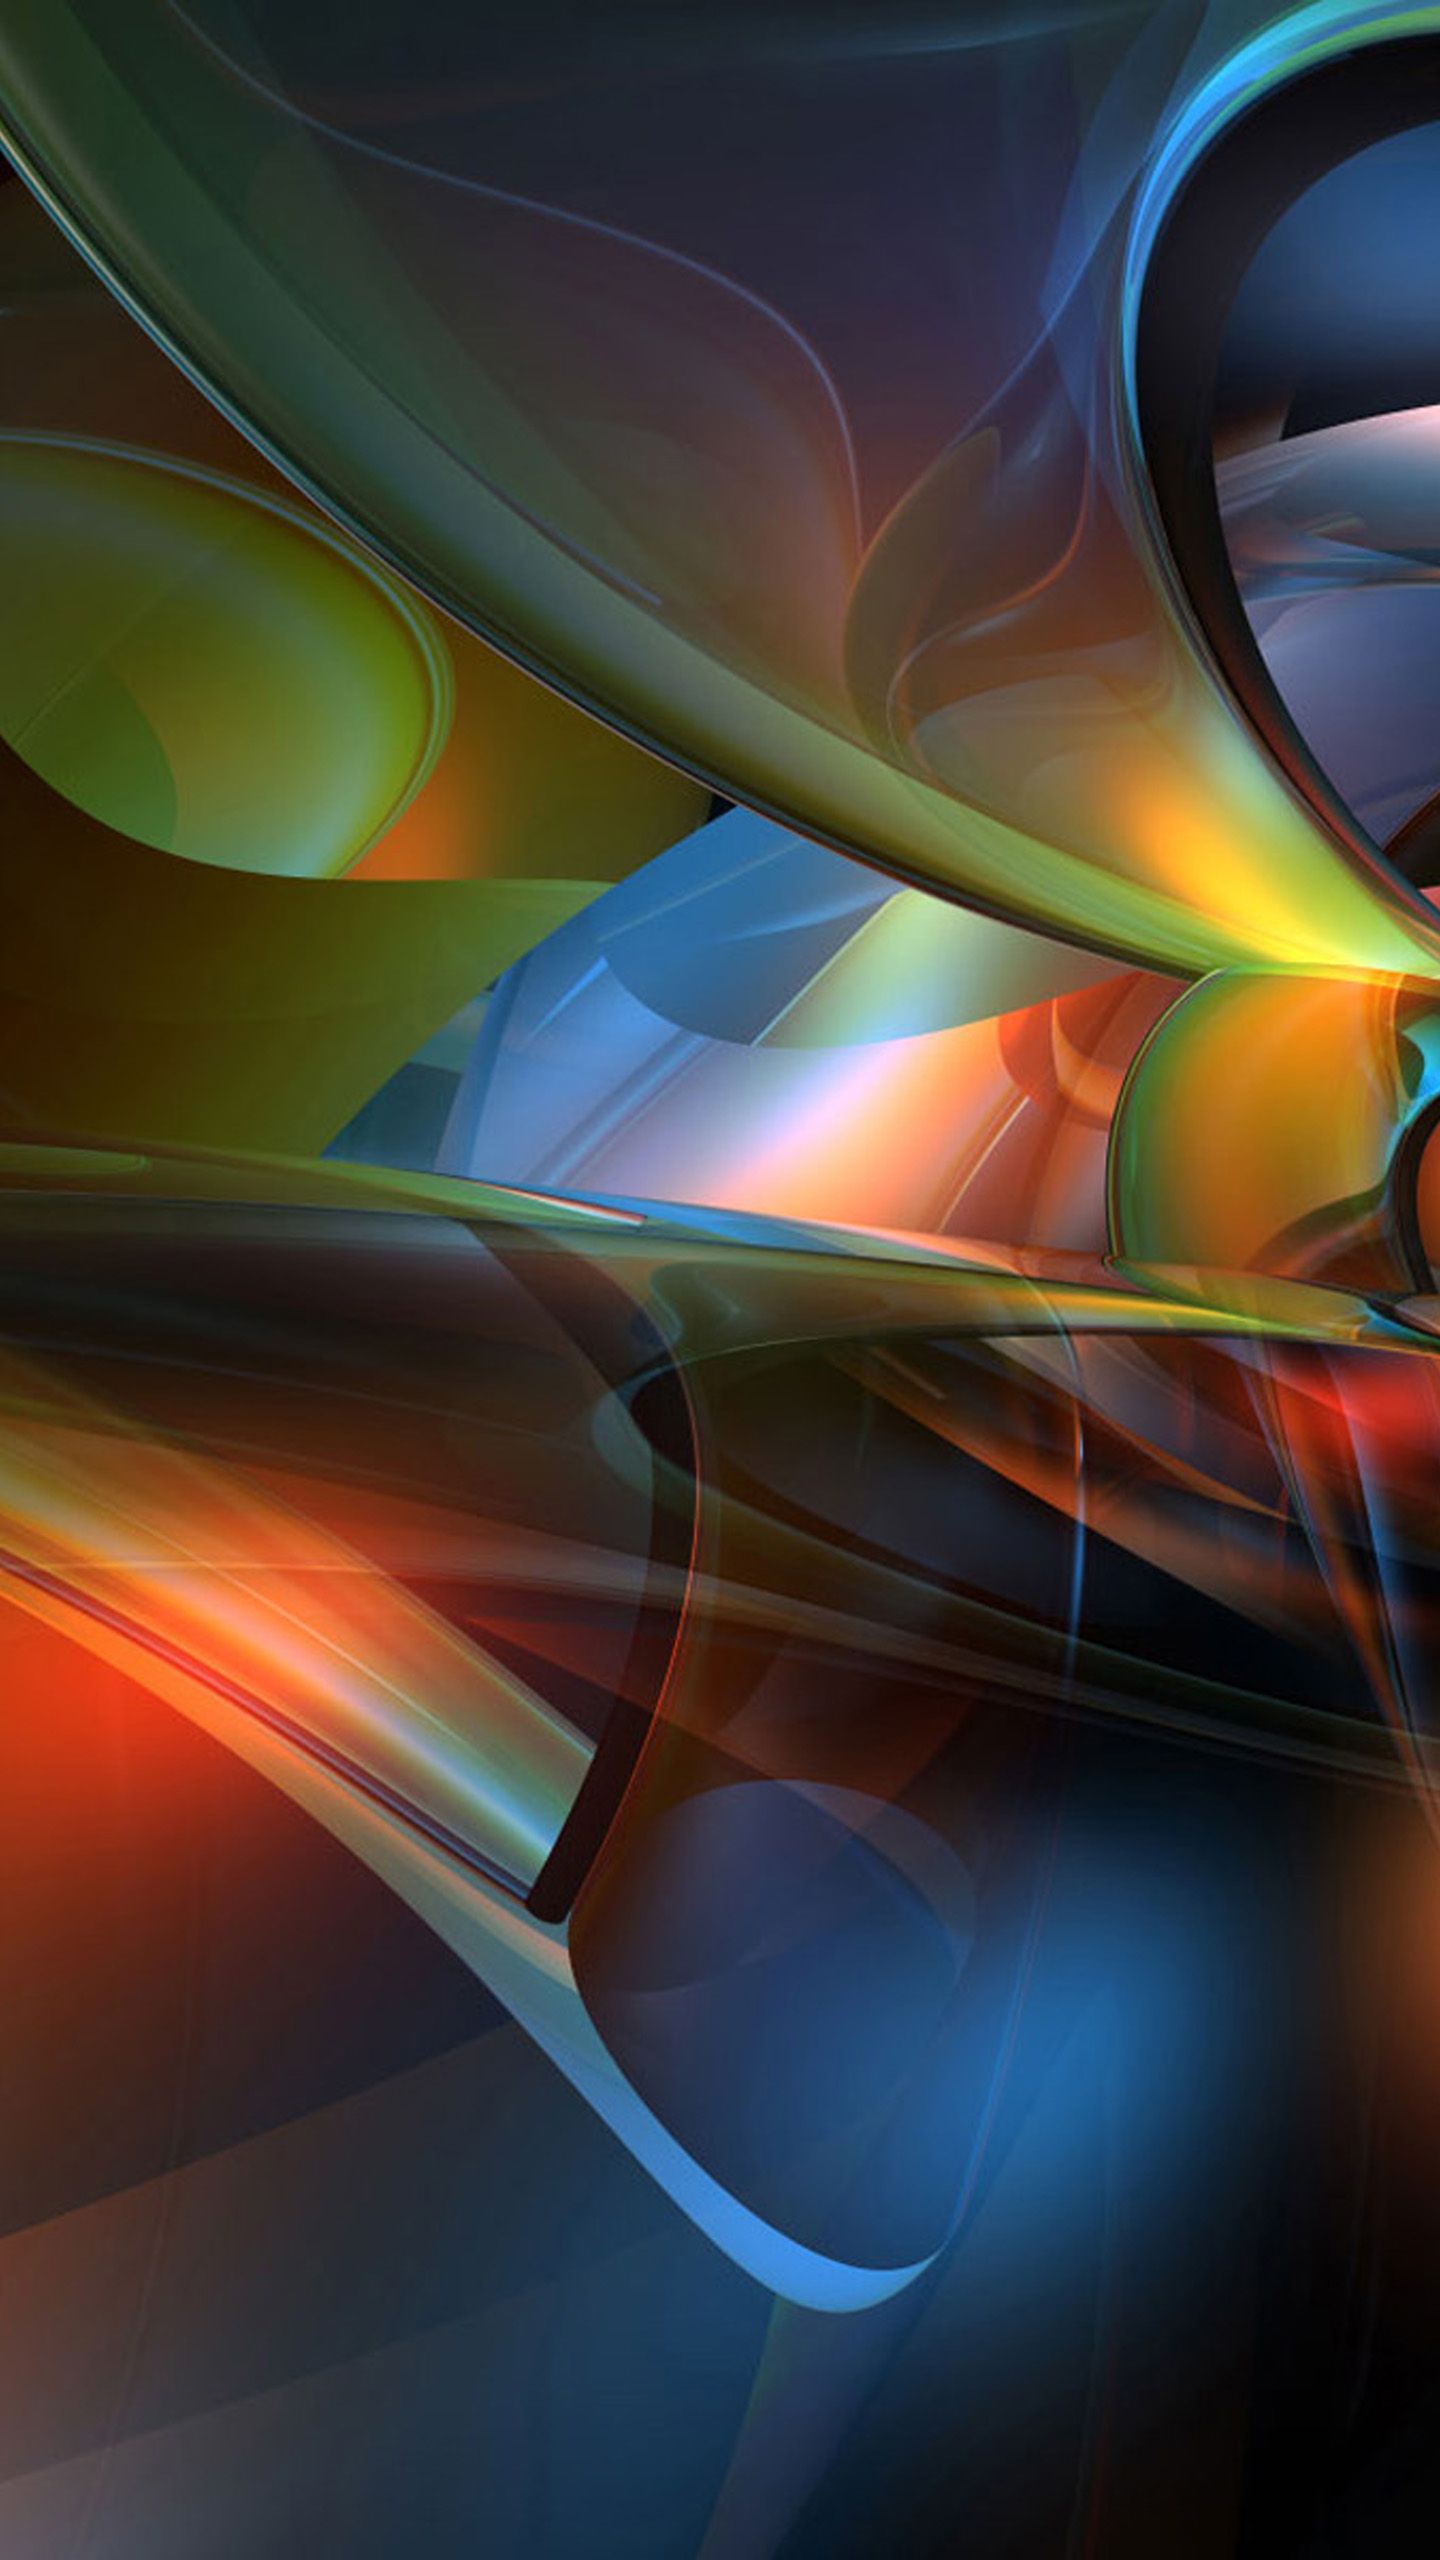 3d Abstract Hd Wallpaper For Mobile